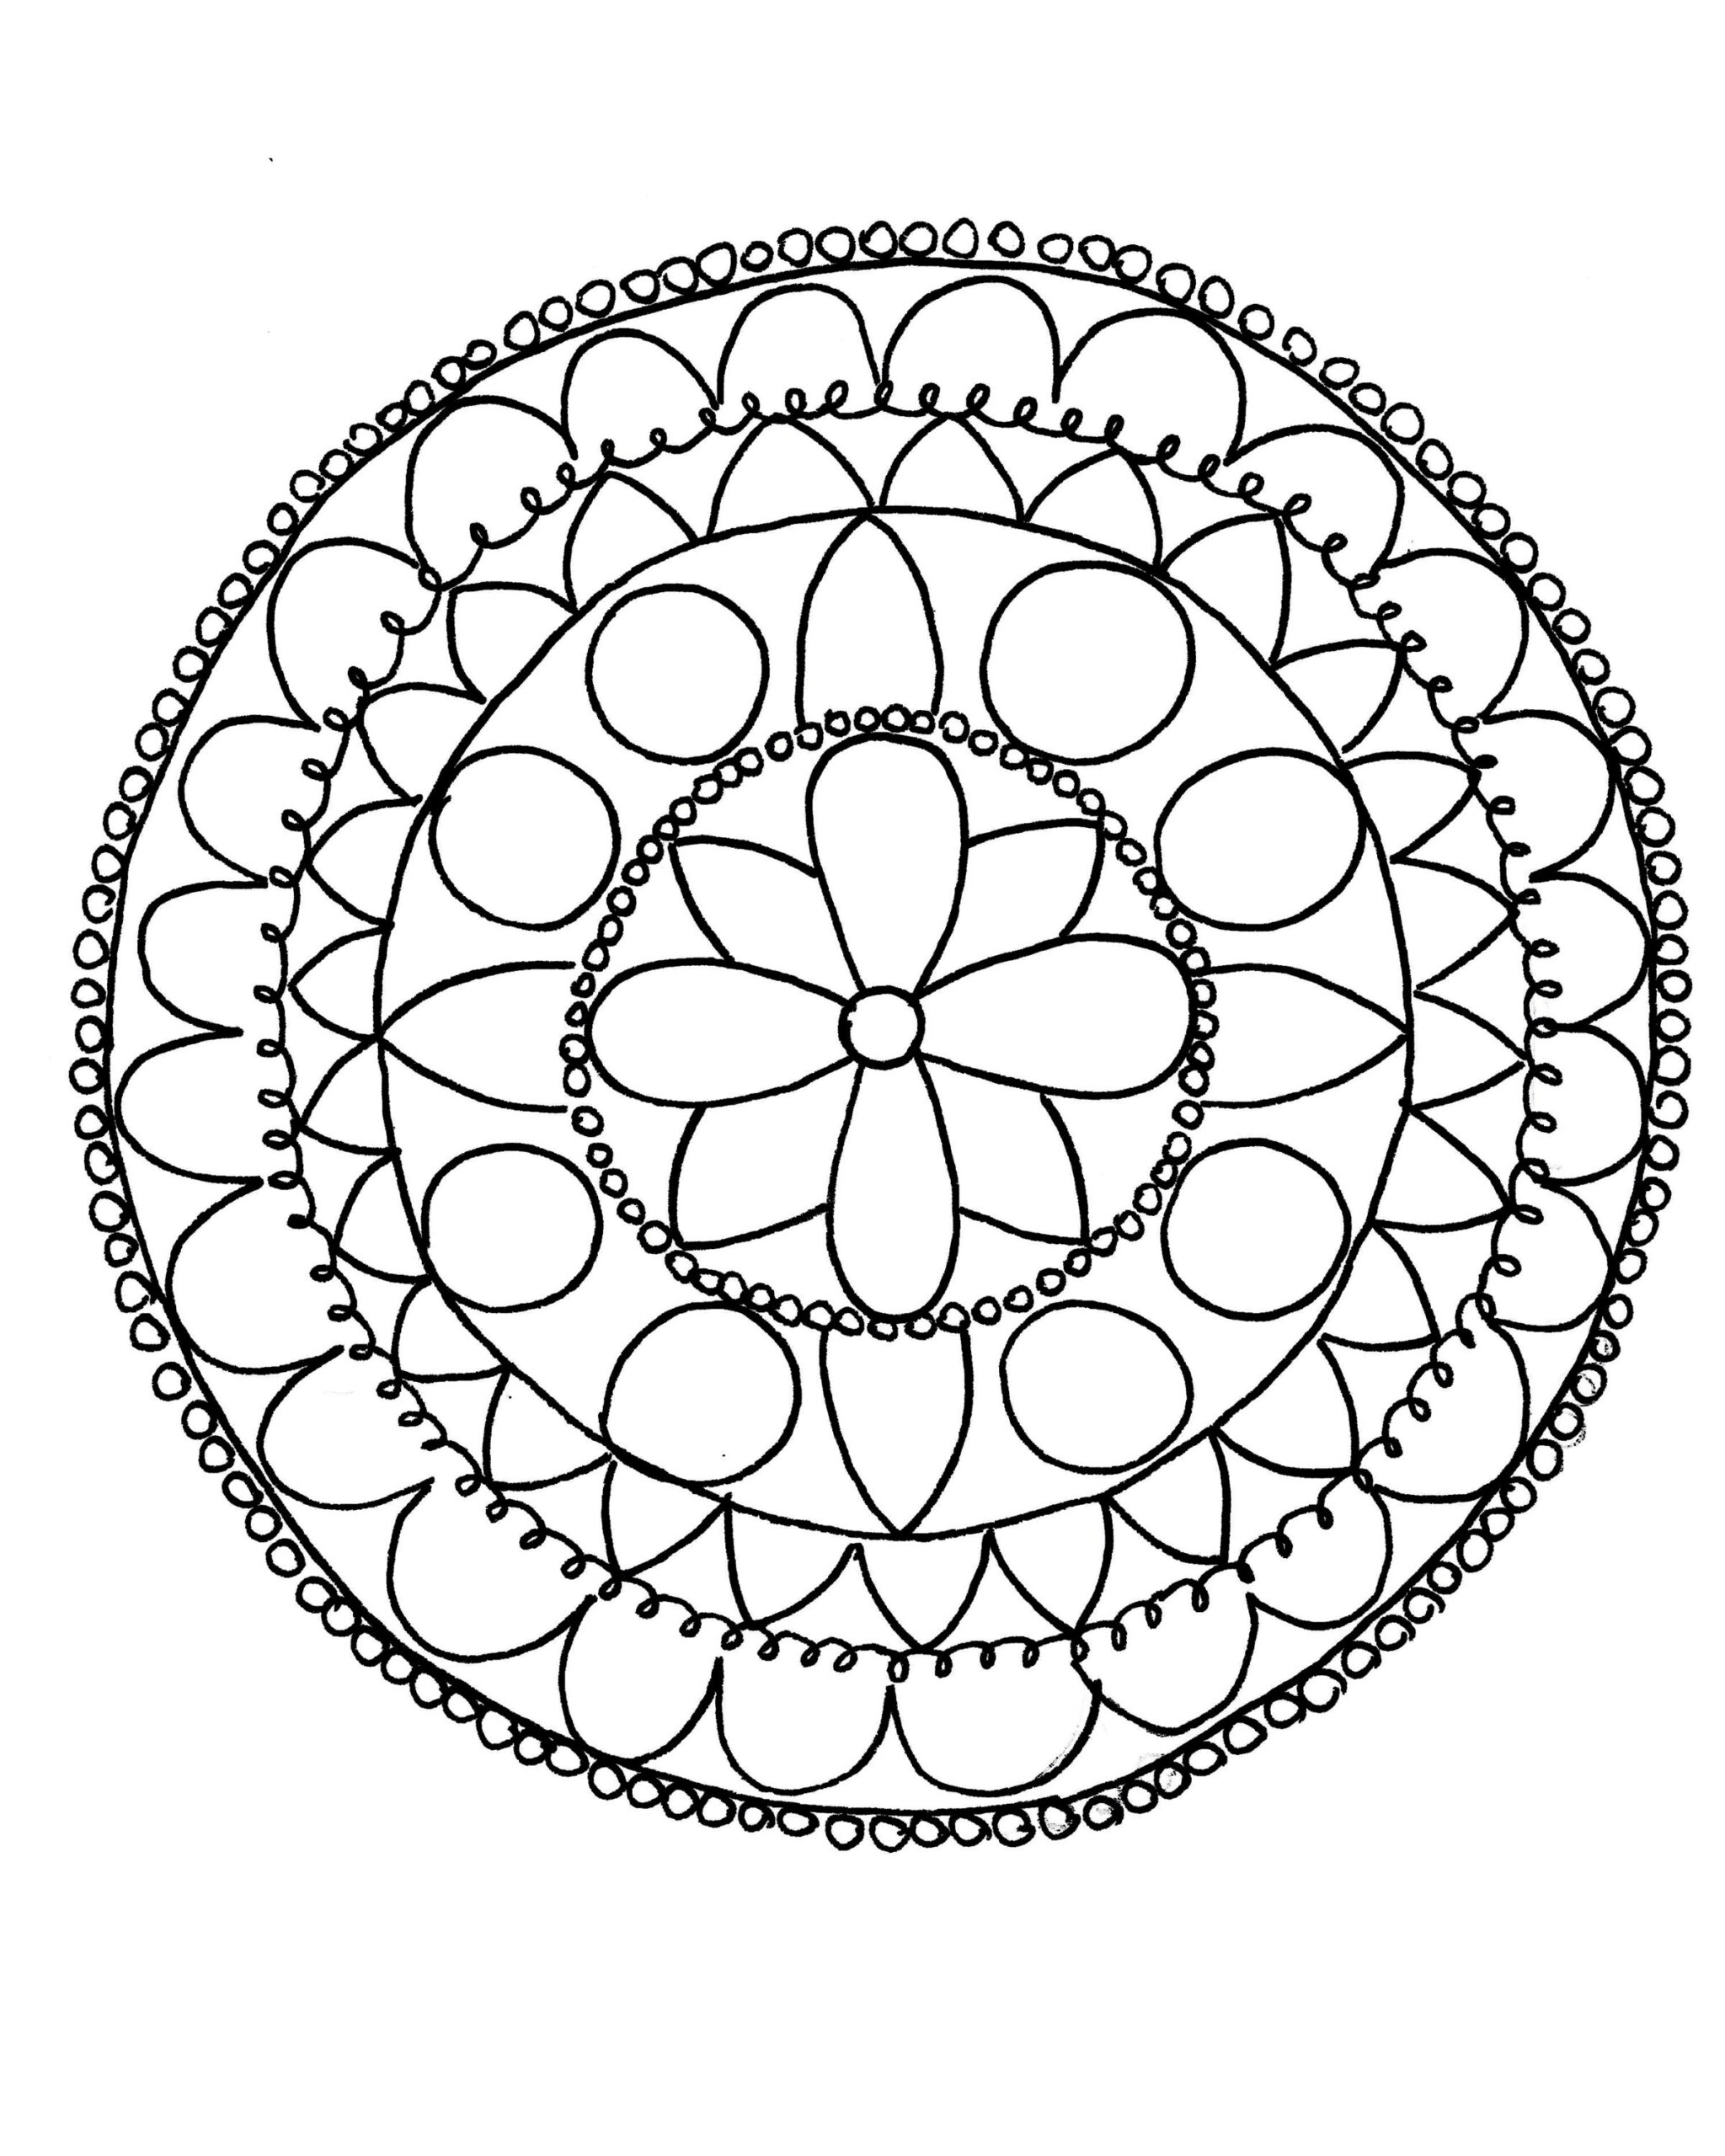 How To Draw A Mandala (With Free Coloring Pages!) | Mandala Coloring dedans Mandala Simple À Imprimer